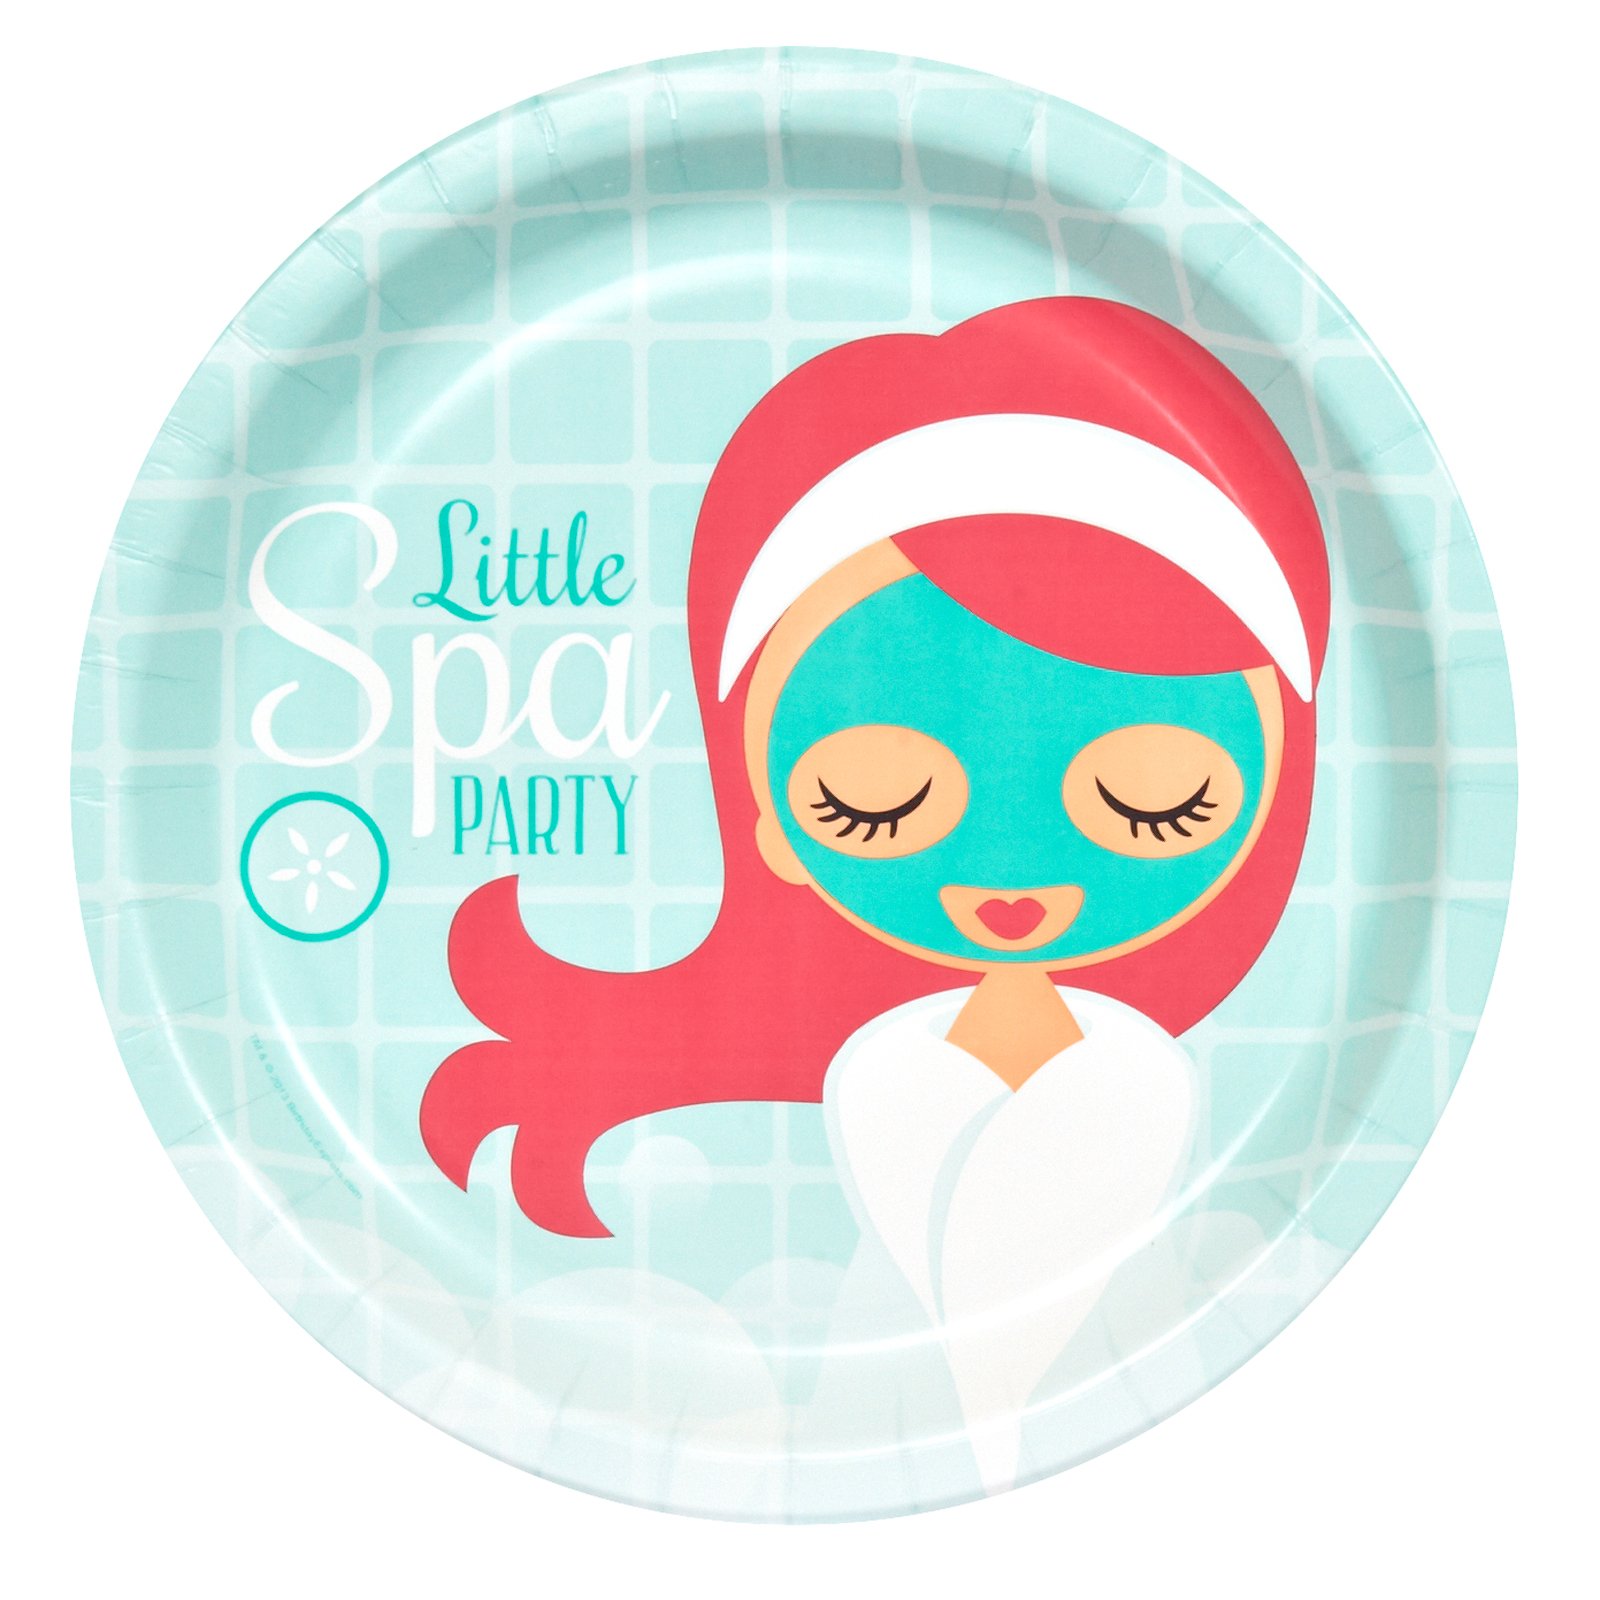 Kids Spa Party Clipart Little Spa Party Dinner Plates